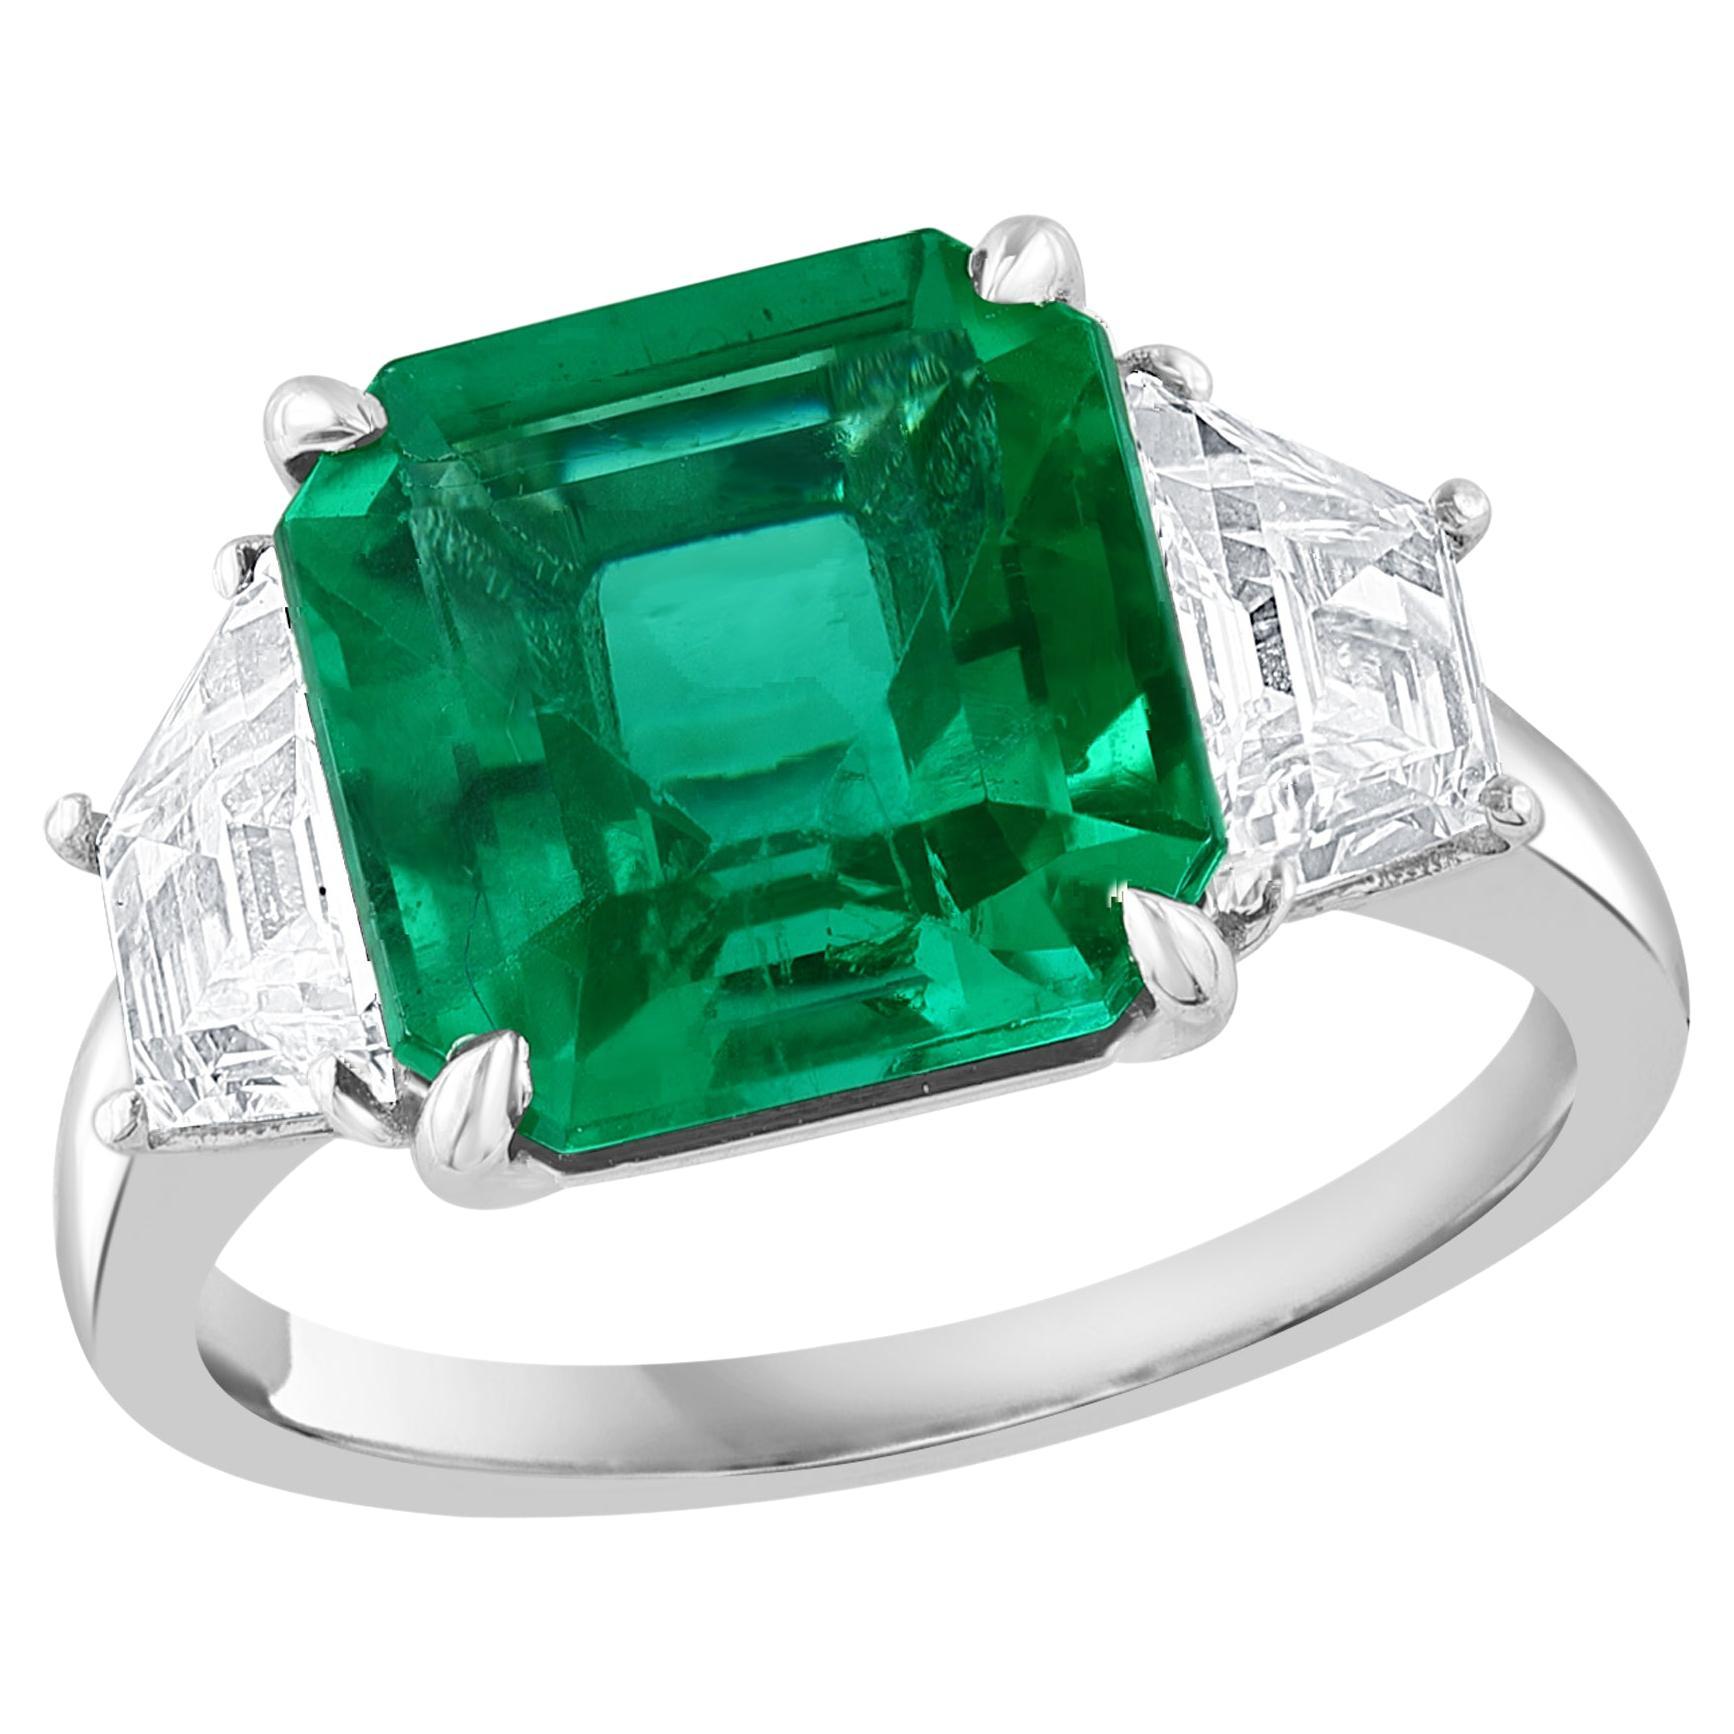 Certified 4.26 Carat Emerald Cut Emerald and Diamond 3 Stone Engagement Ring For Sale